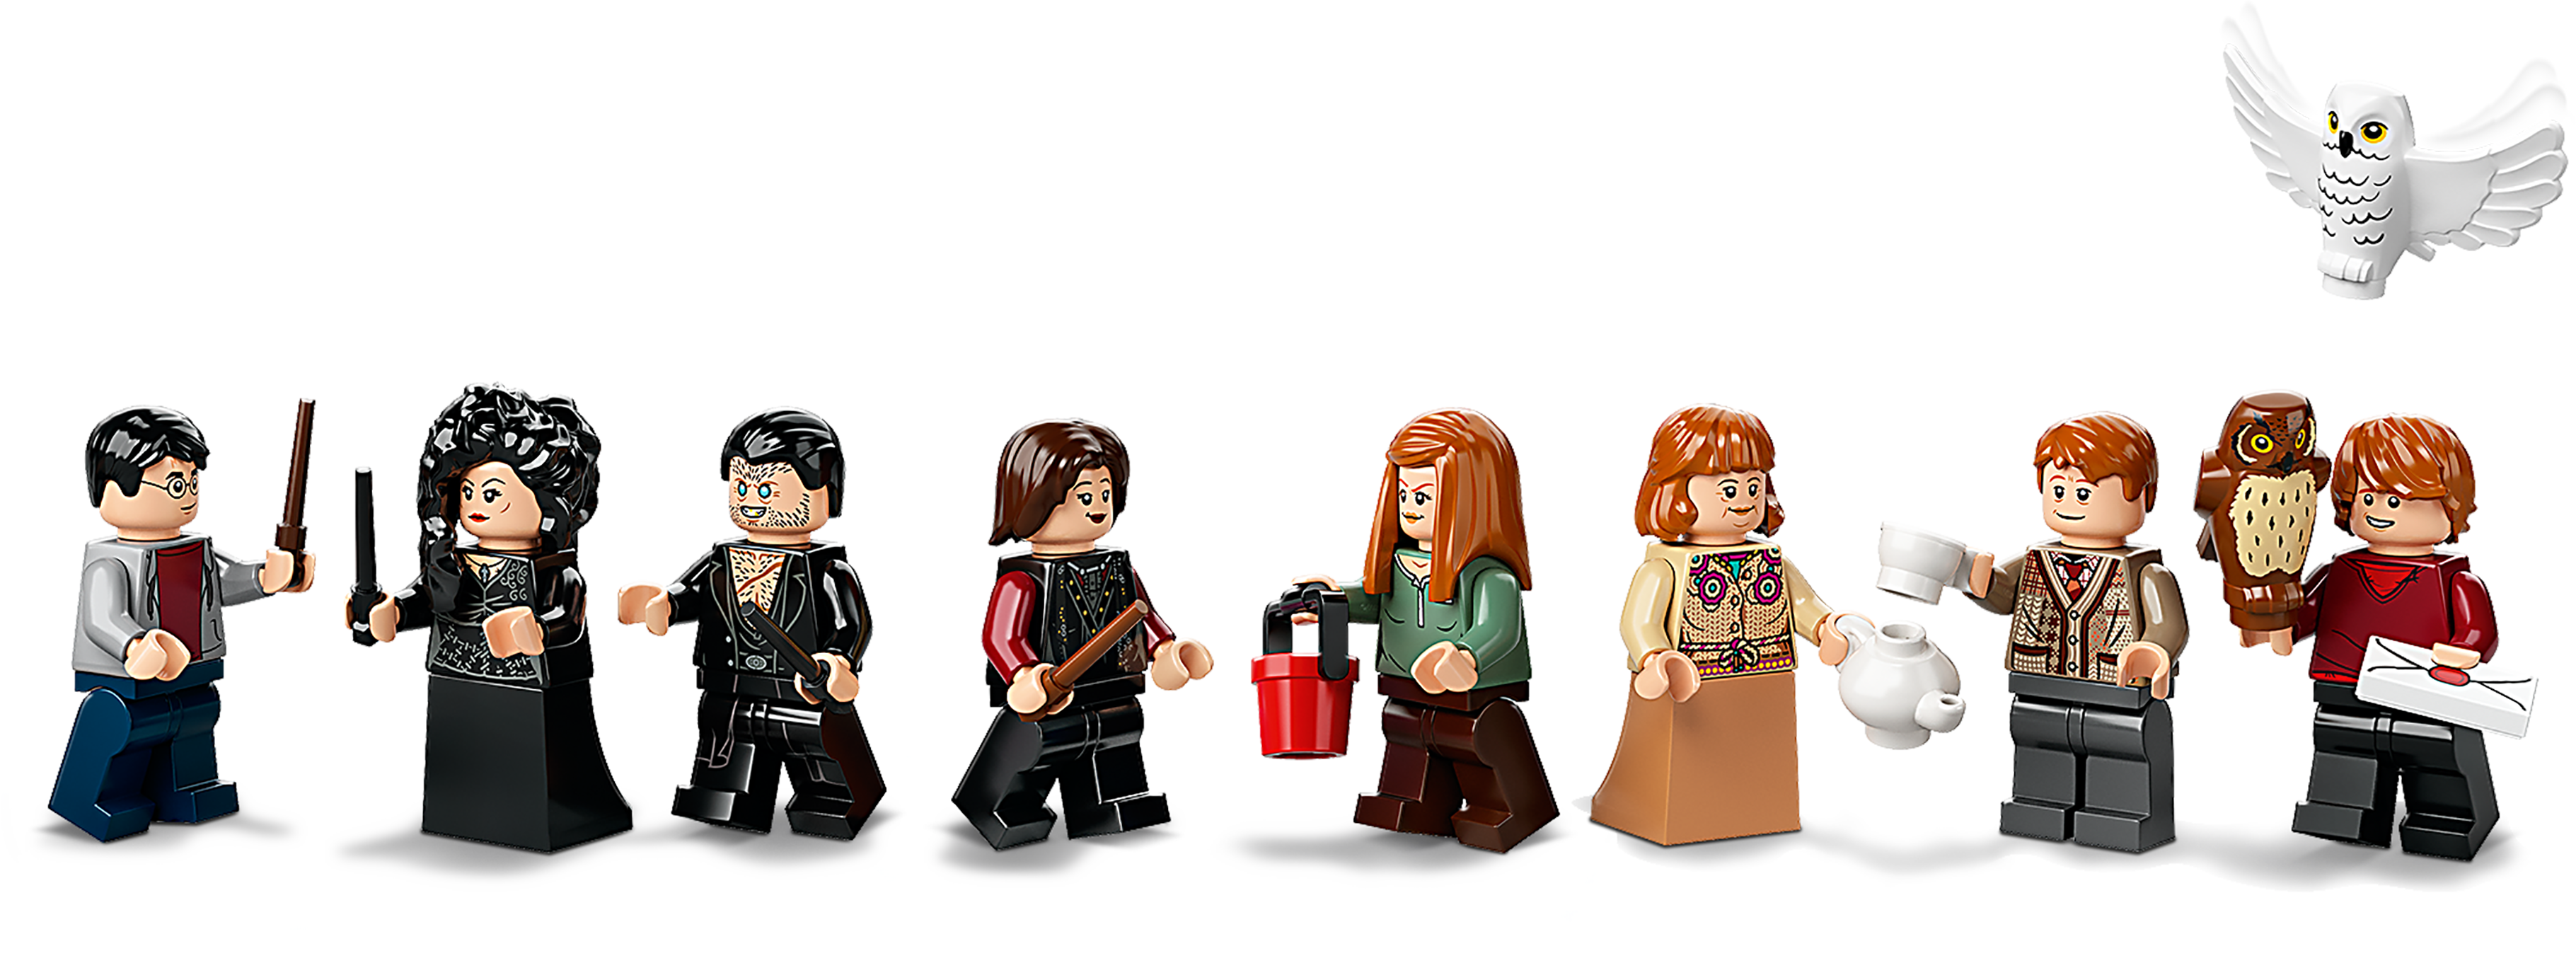 Attack on the Burrow 75980 | Harry Potter™ | Buy online at the Official  LEGO® Shop US